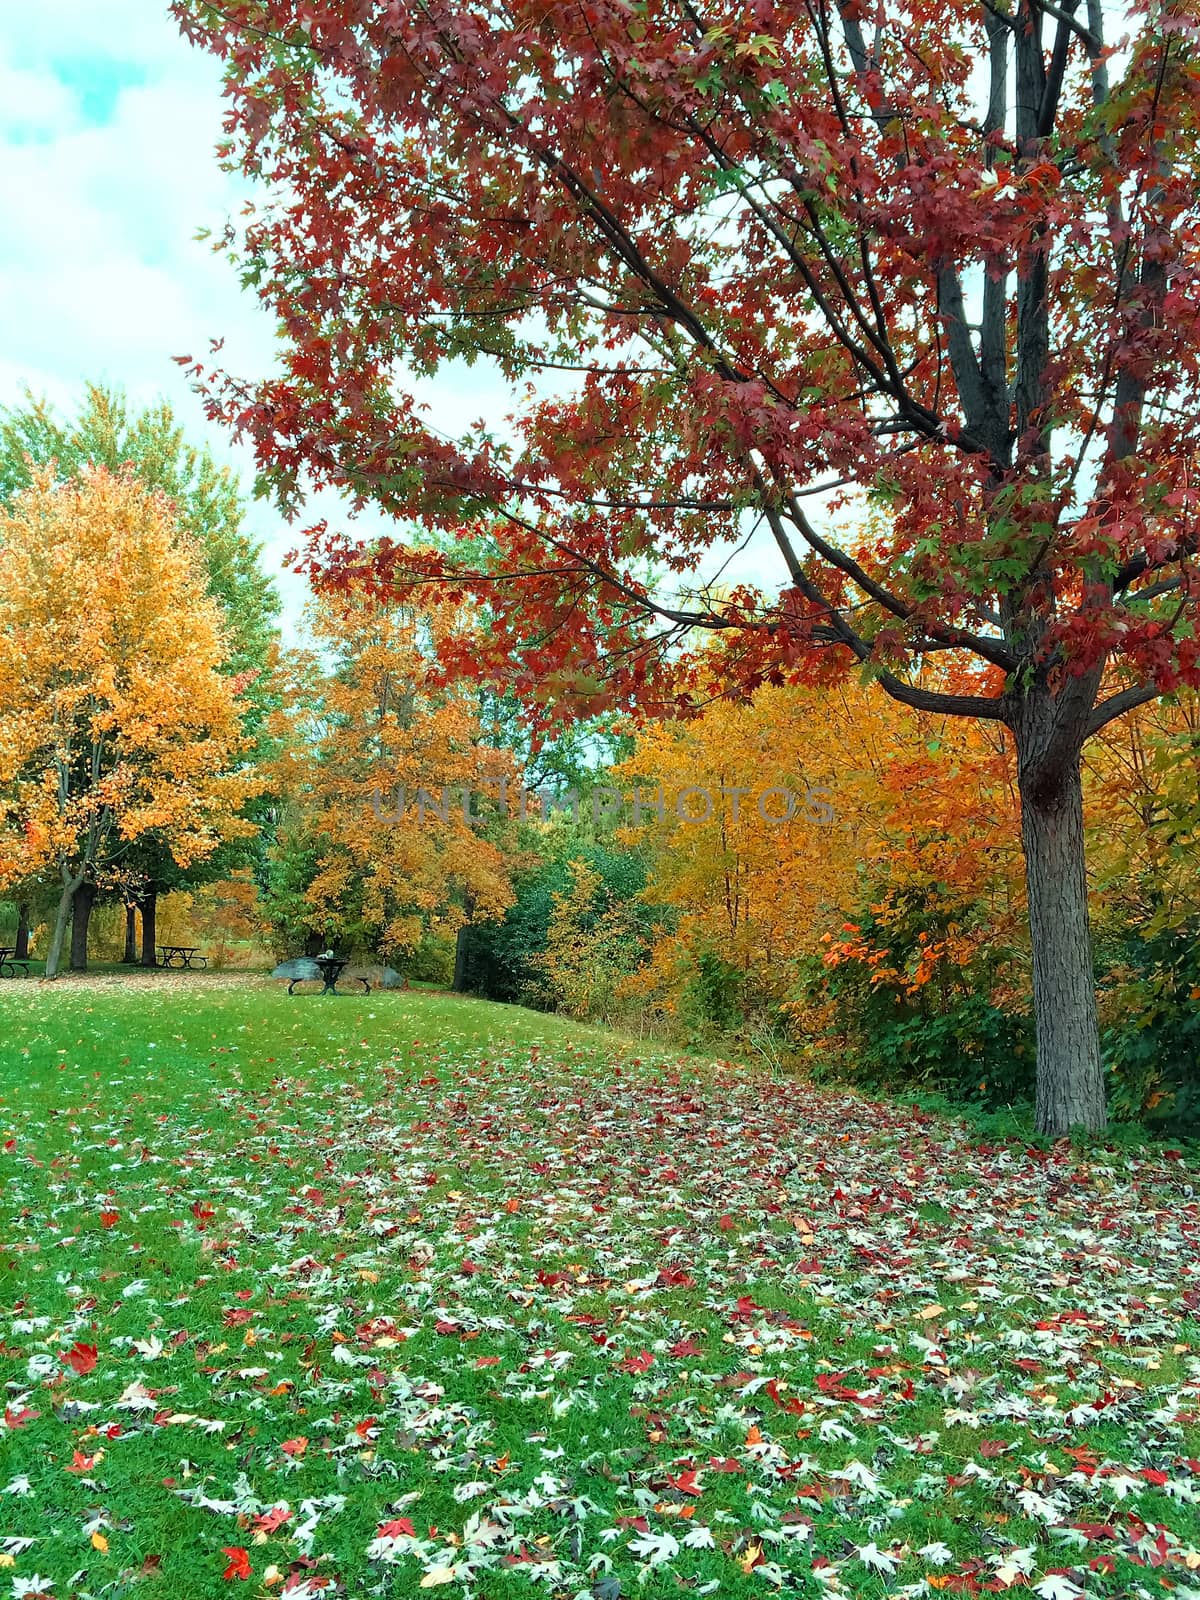 Autumn landscape with green lawn and colorful trees. Quebec, Canada.